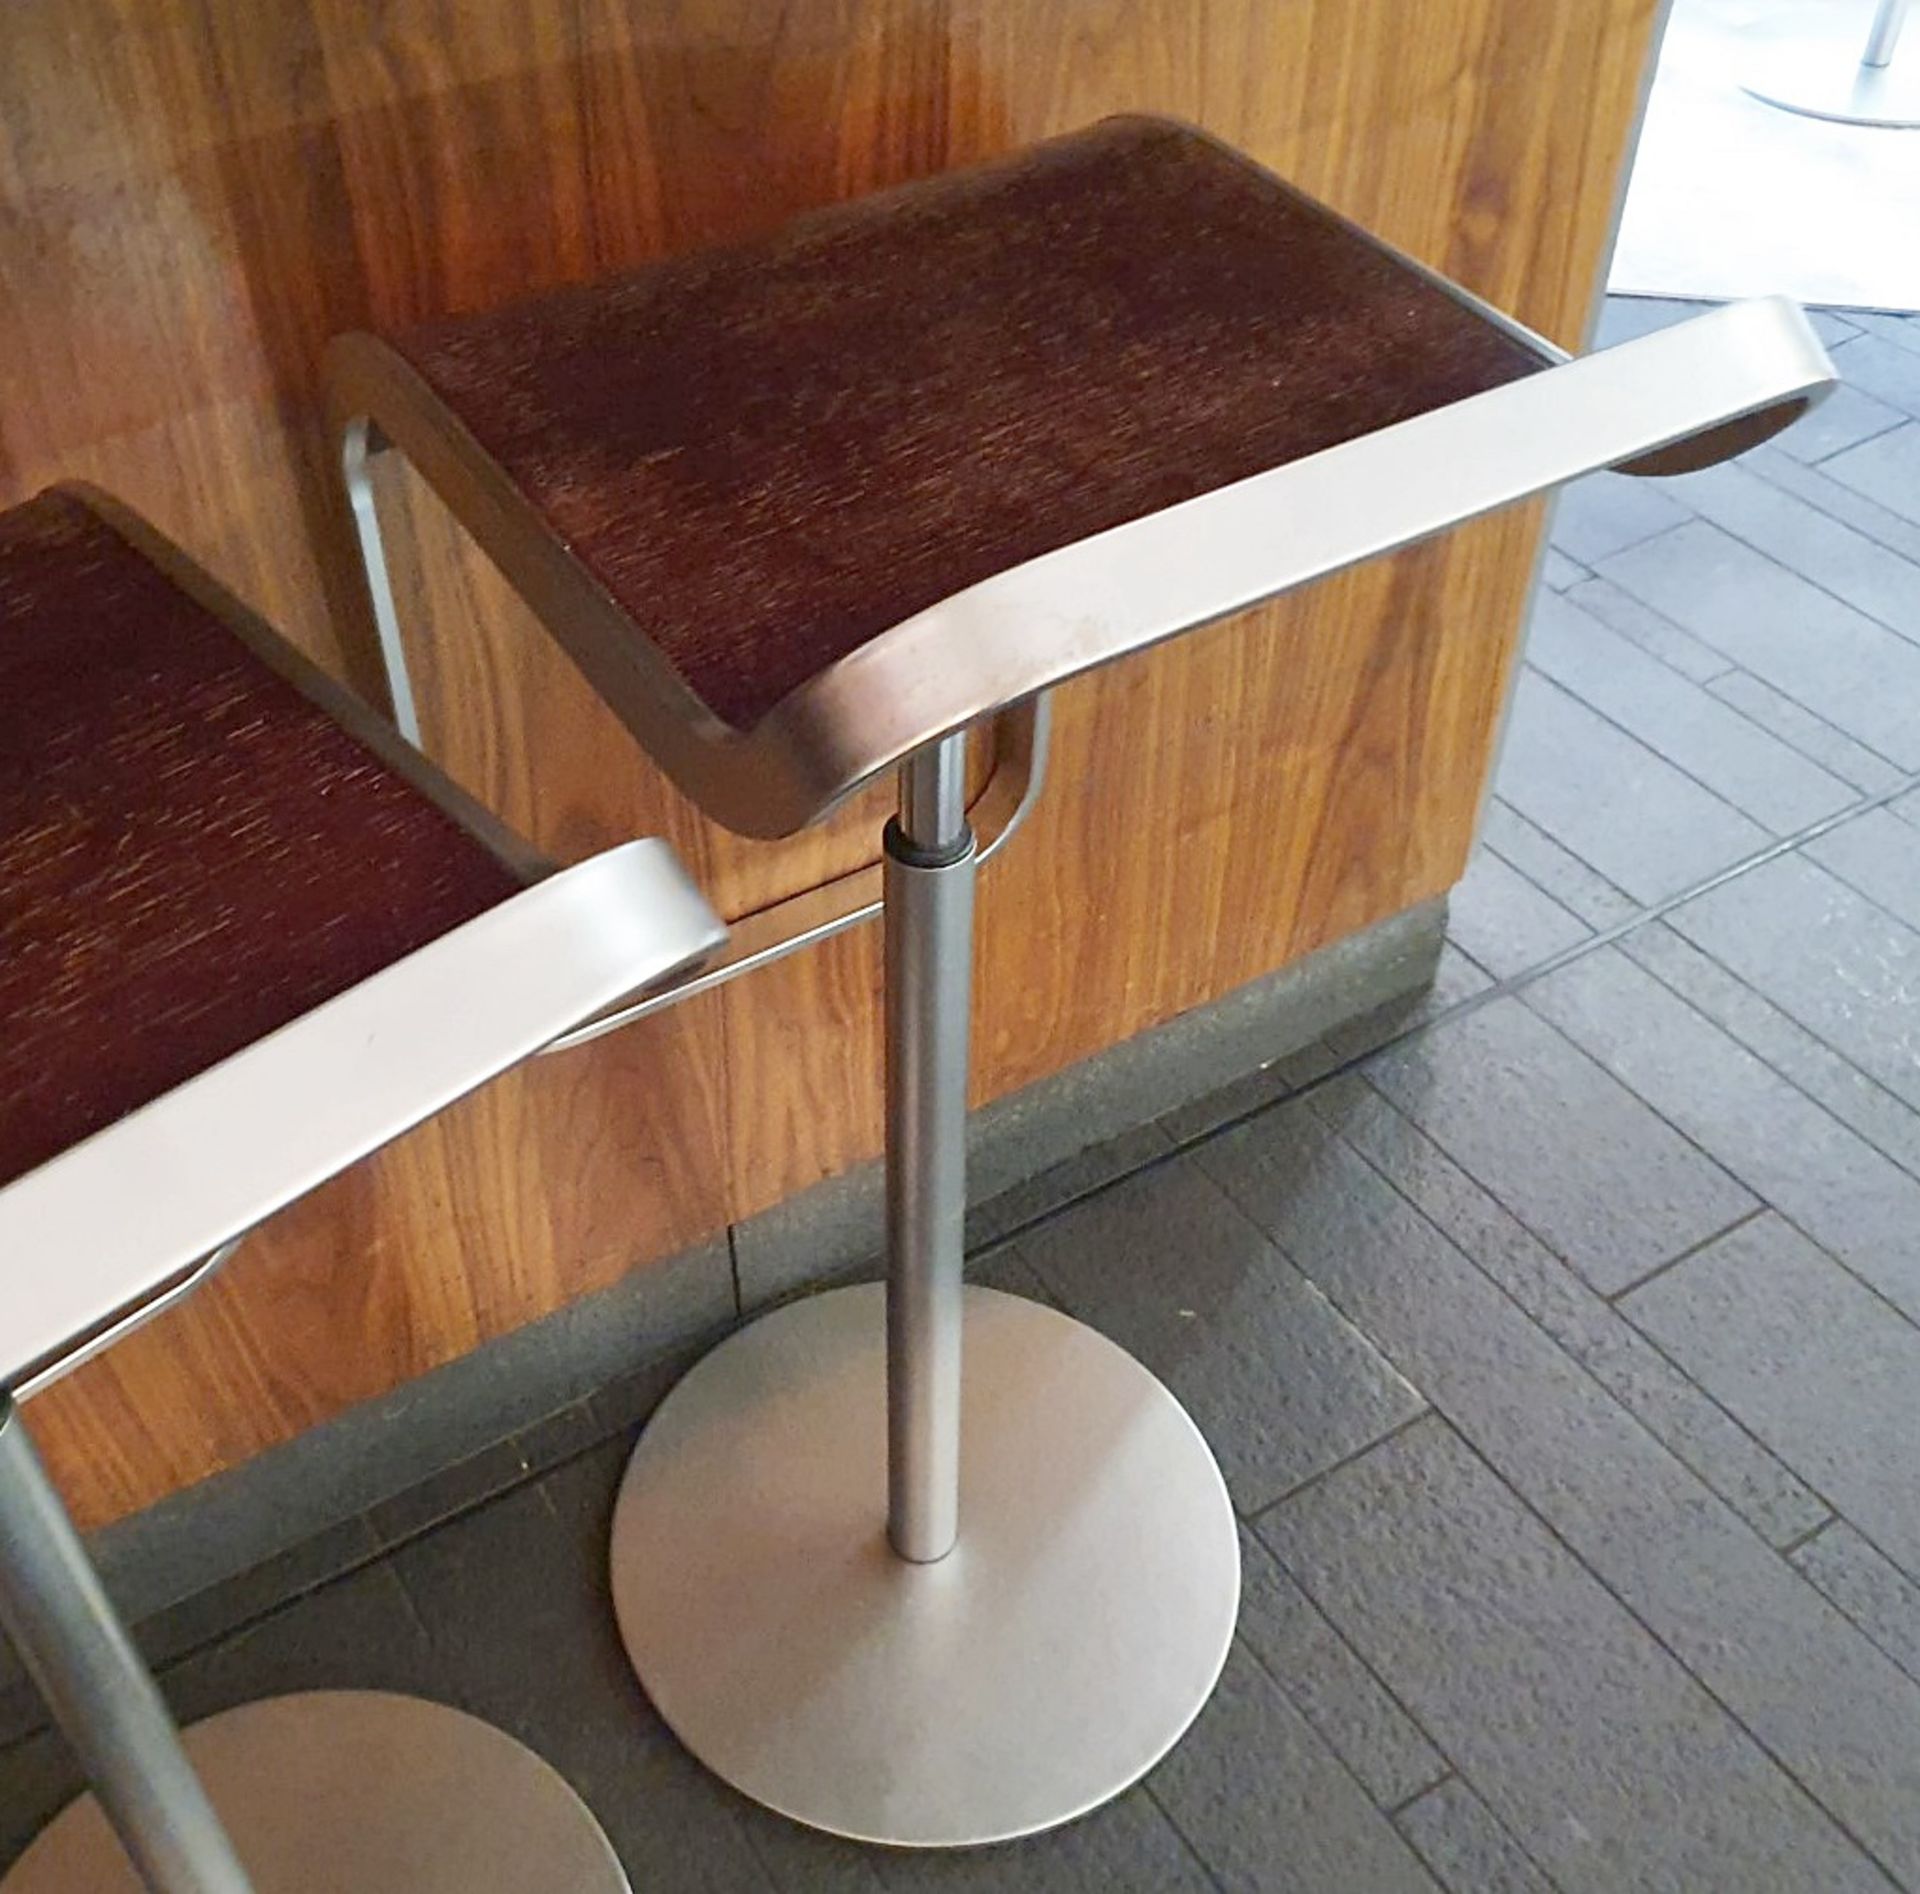 6 x Heavy Duty Commercial Bar Stools With Adjustable Hydraulic Aided Height - Dimensions: 35cm x - Image 6 of 7